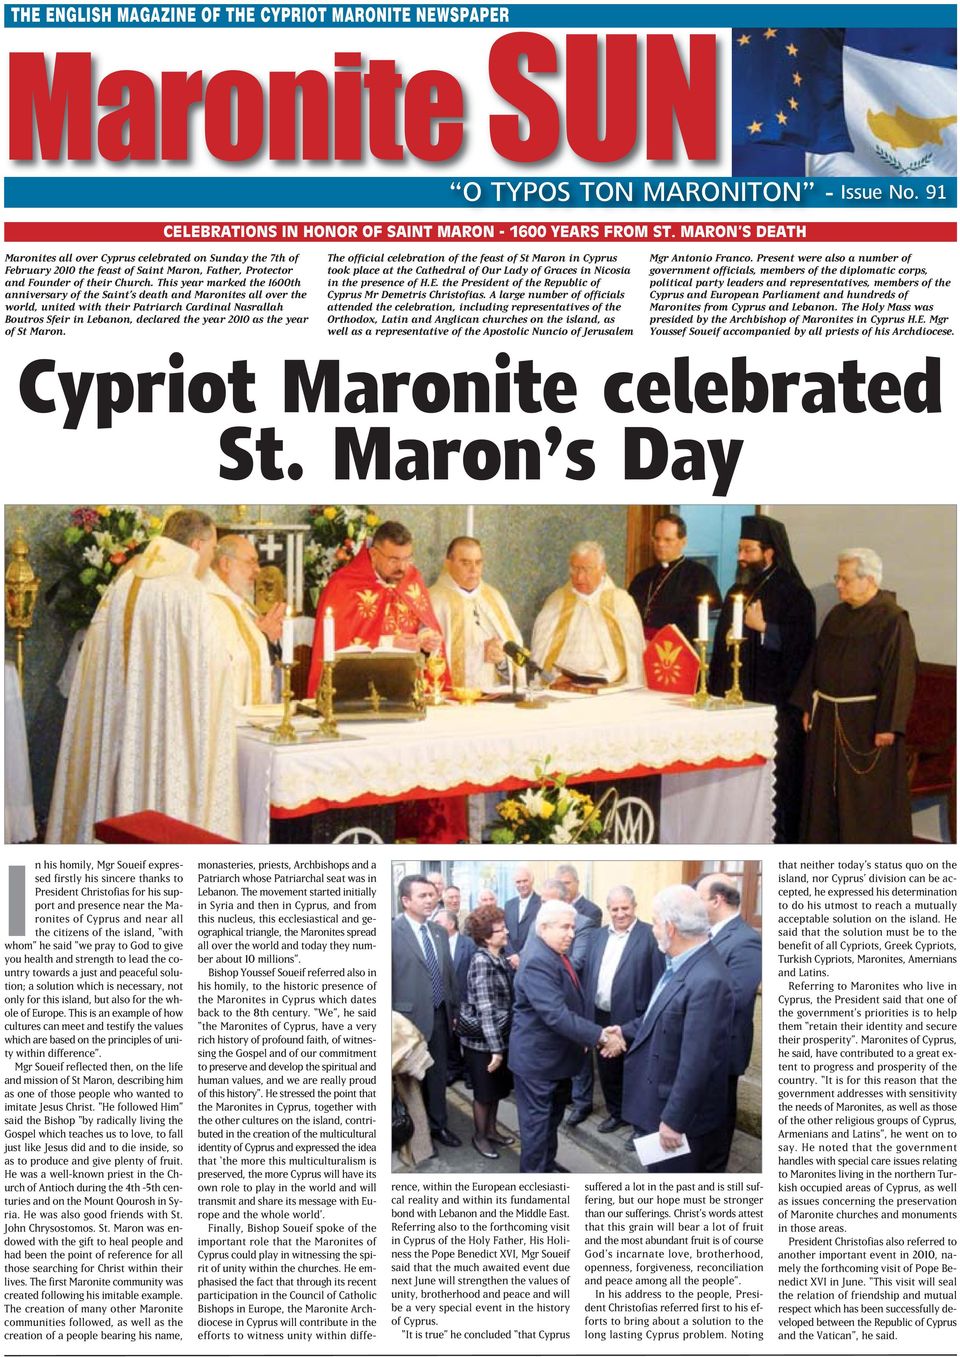 This year marked the 1600th anniversary of the Saint s death and Maronites all over the world, nited with their Patriarch Cardinal Nasrallah Botros Sfeir in Lebanon, declared the year 2010 as the